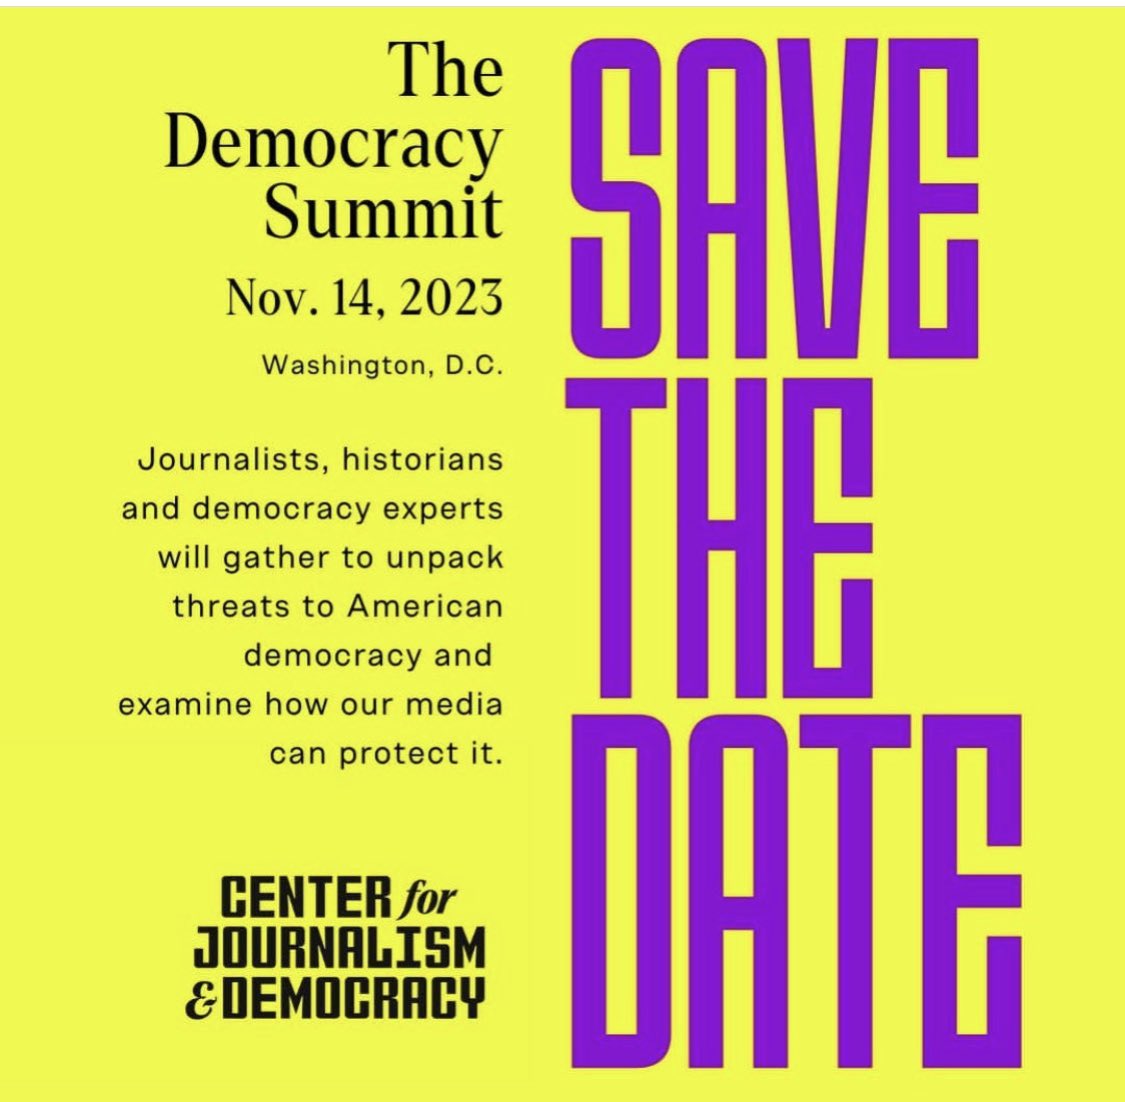 Journalists! Put Nov. 14 on your calendars as we at the @C4JDHowardU are holding our second Democracy Summit at @HowardU in DC. Join hundreds of journalists from across the country for a day of learning with democracy experts, historians, legal minds. Registration opening soon.